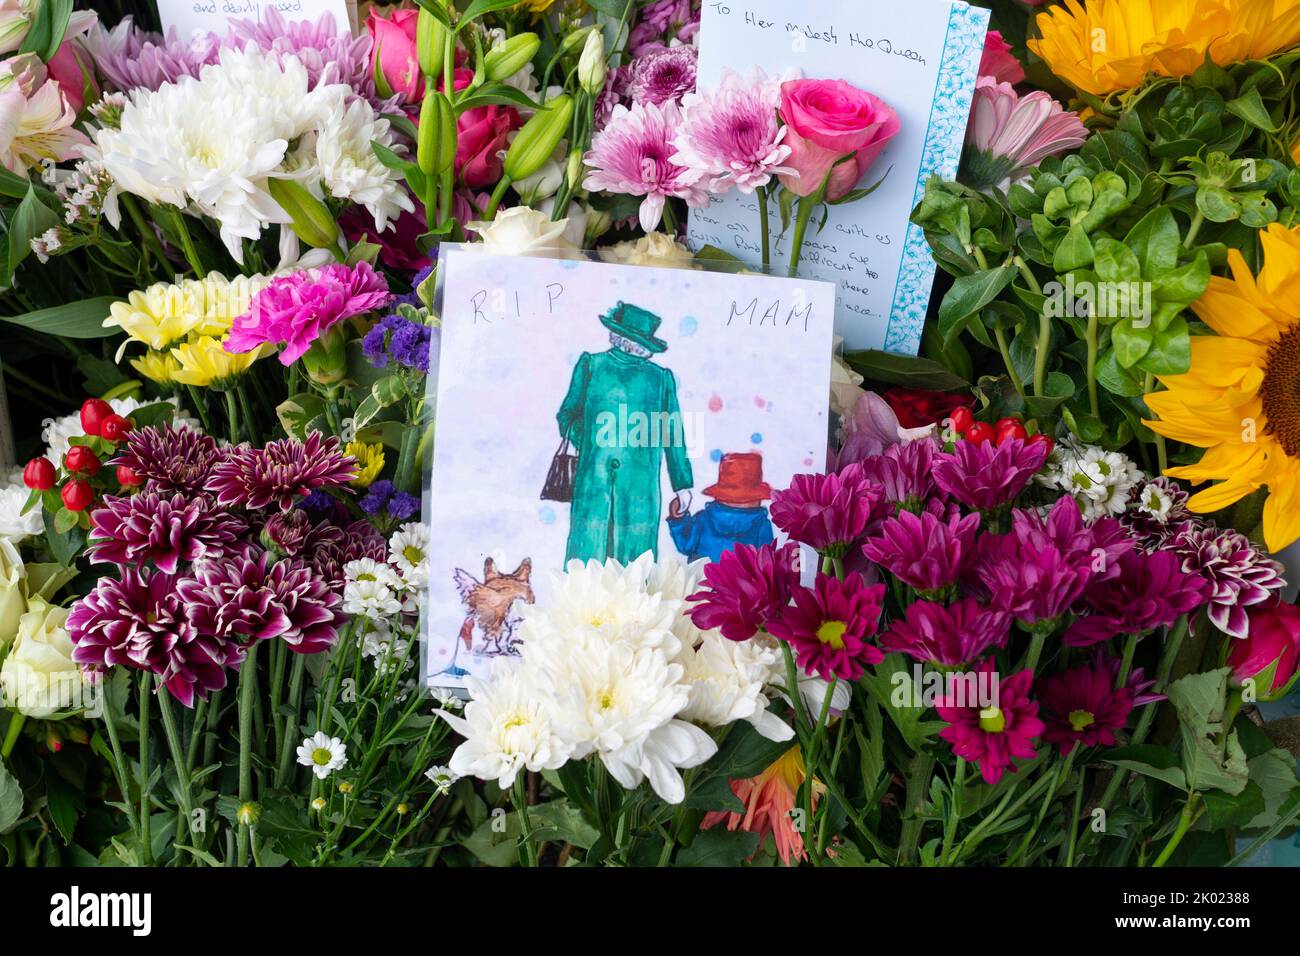 Balmoral, Scotland, UK. 9th September 2022. Members of the public laying flowers at the entrance gates to Balmoral Castle following news of death of HRH Queen Elizabeth II yesterday.  Iain Masterton/Alamy Live News Stock Photo